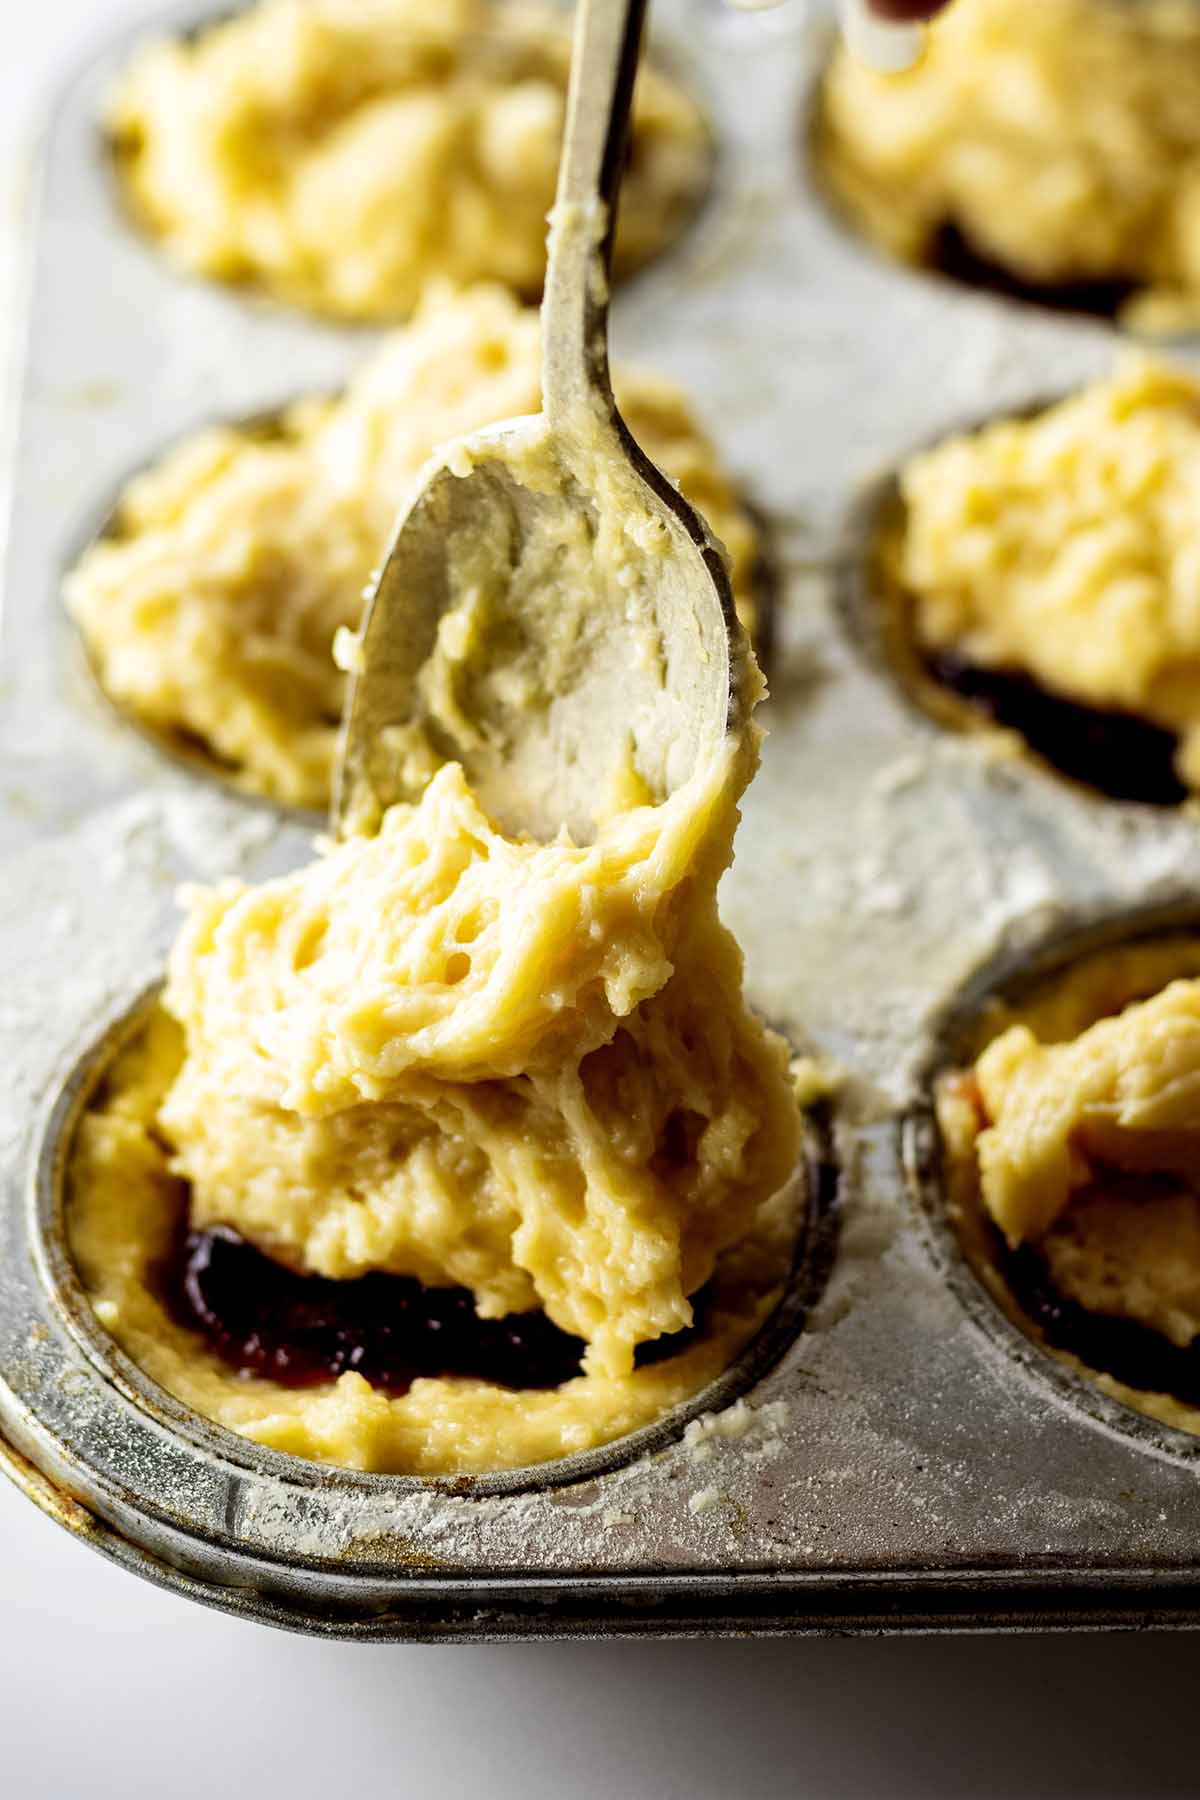 Batter being spooned over fruit preserves in a muffin tin